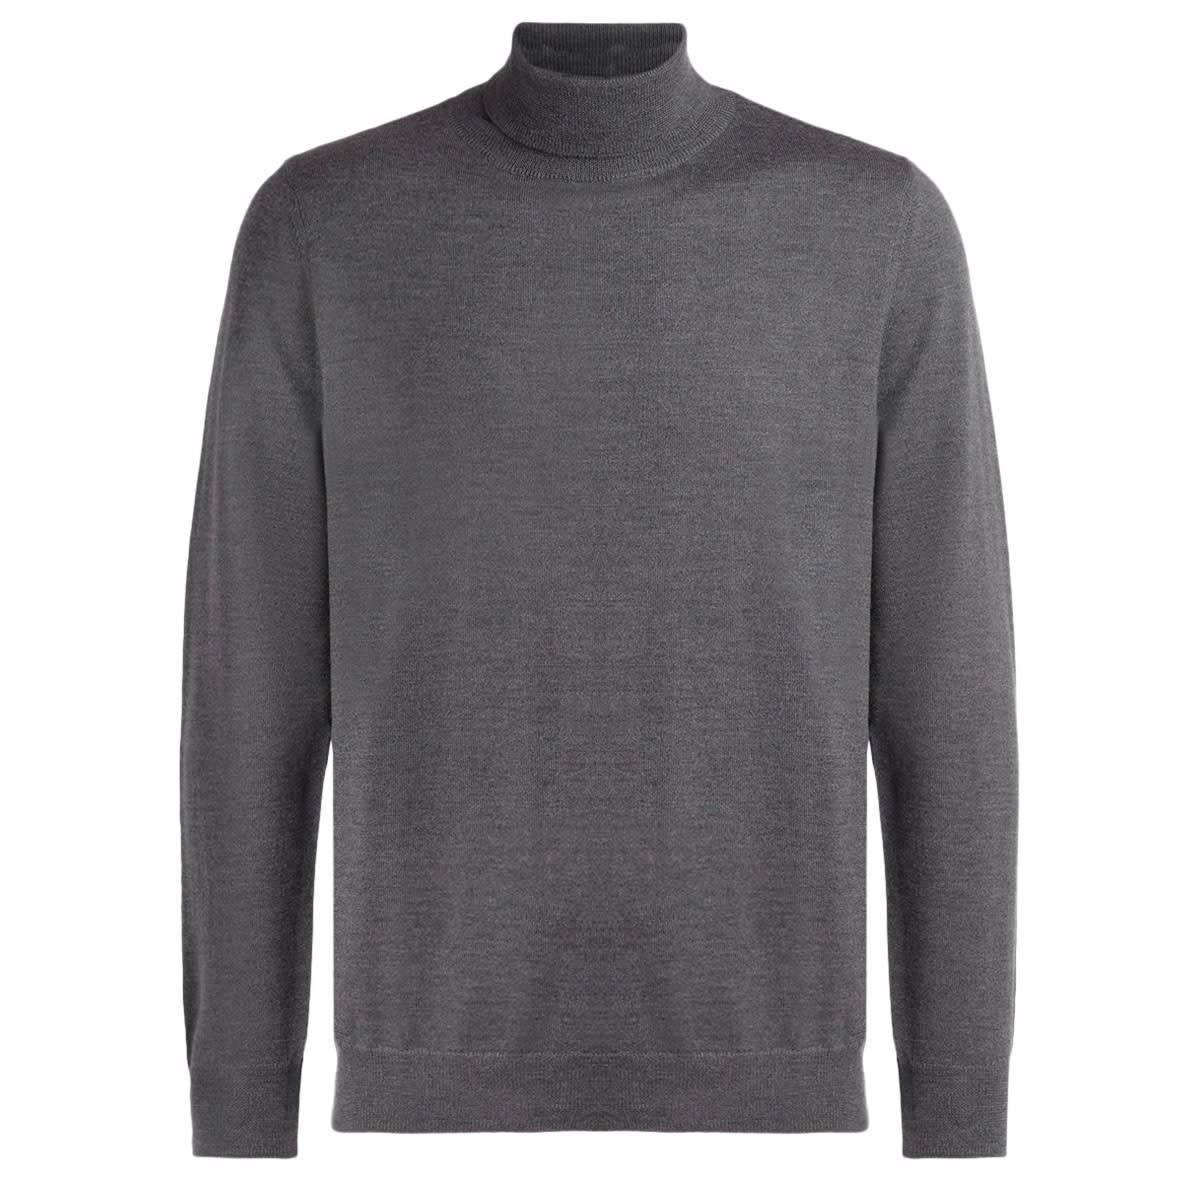 A.p.c. Turtleneck Sweater Made Of Anthracite Gray Merino Wool